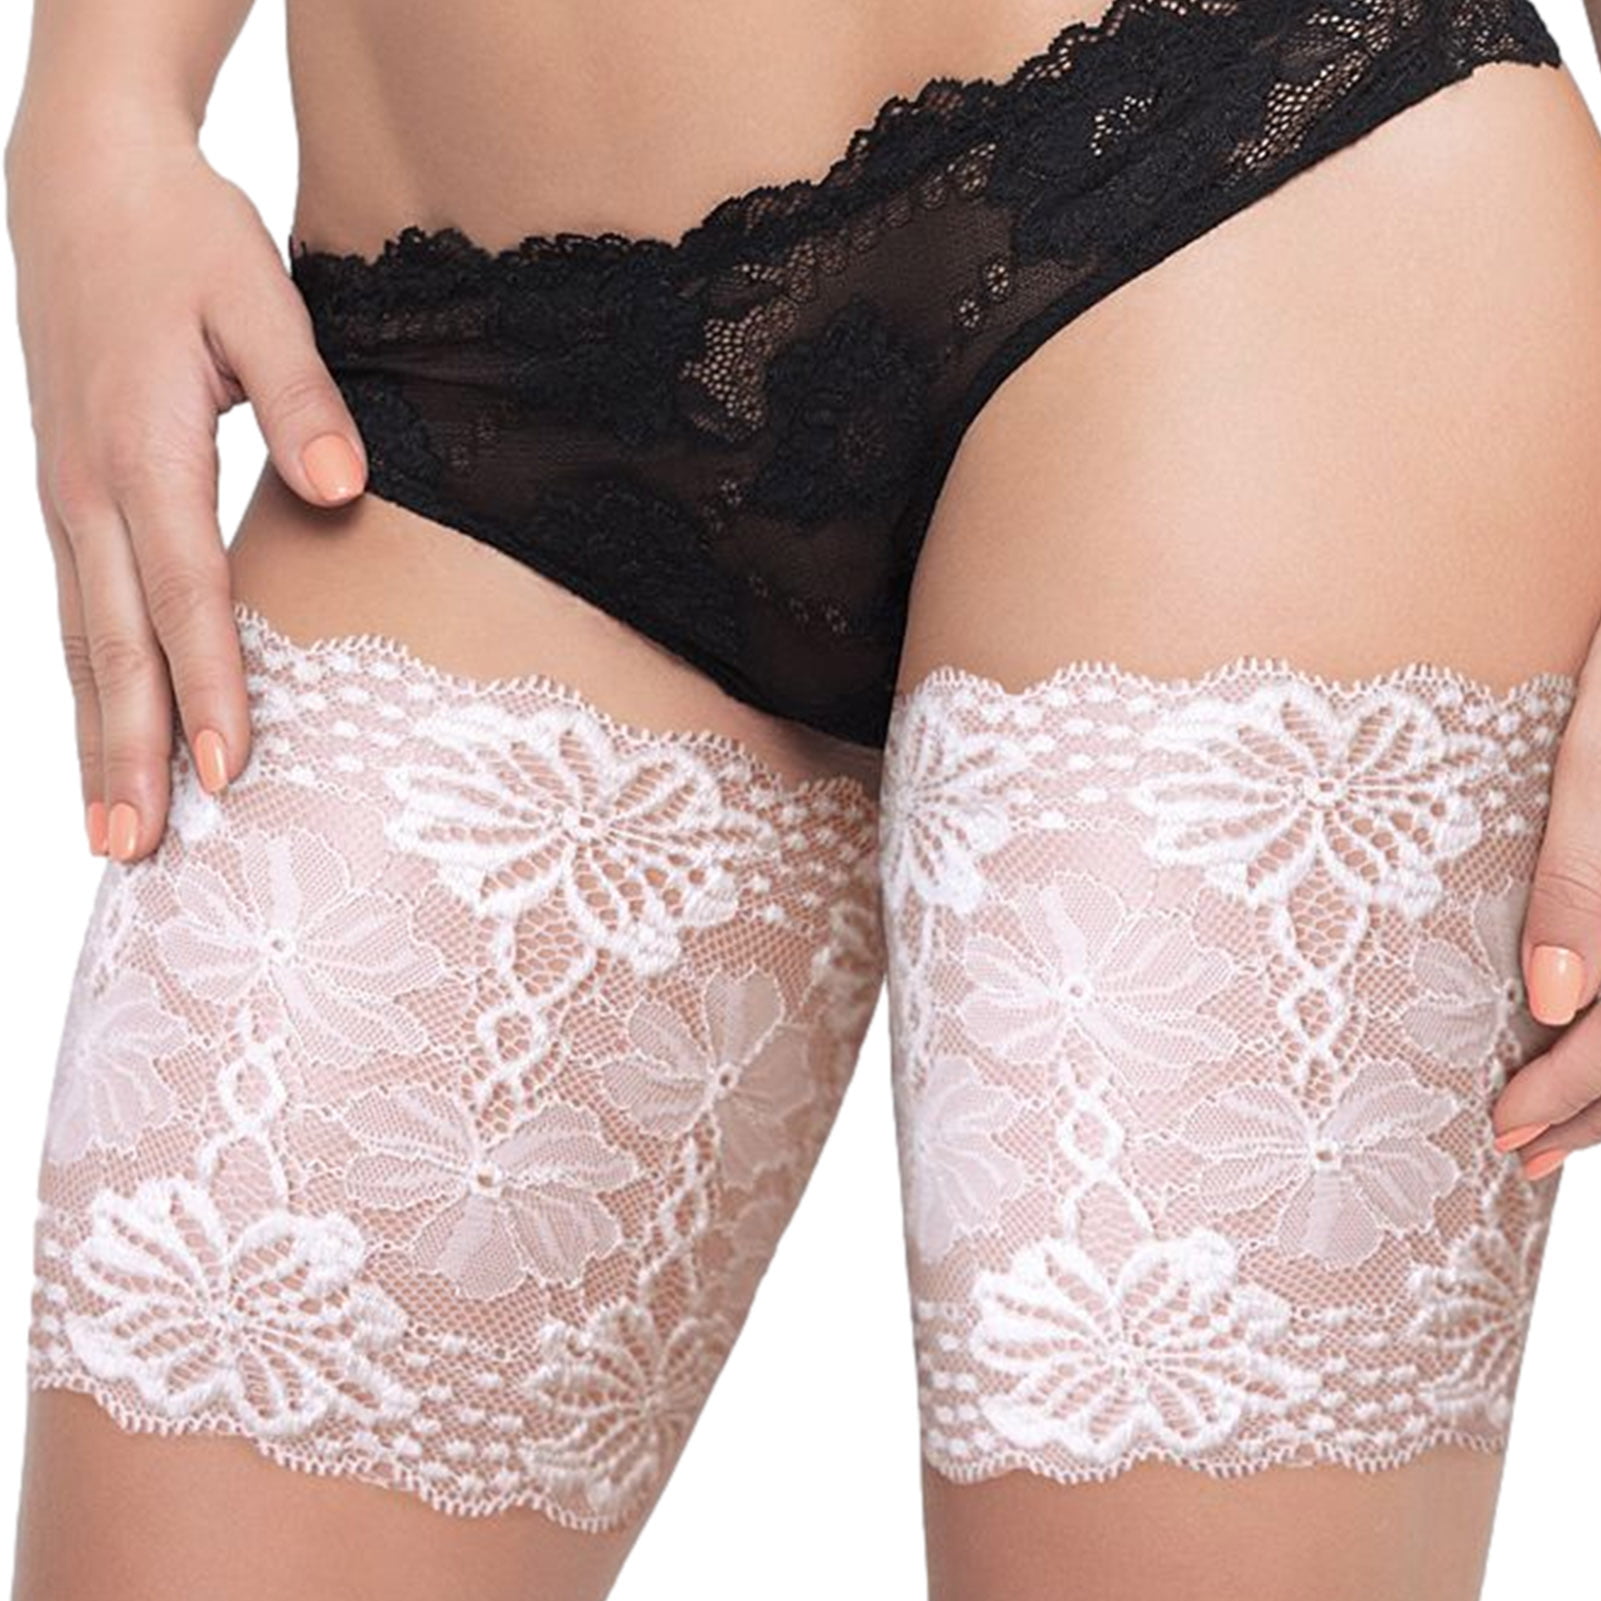 2 Pair Thigh Bands Lace Elastic Anti Chafing Bands with Non Slip Silicone to Prevent Thigh Rubbing 